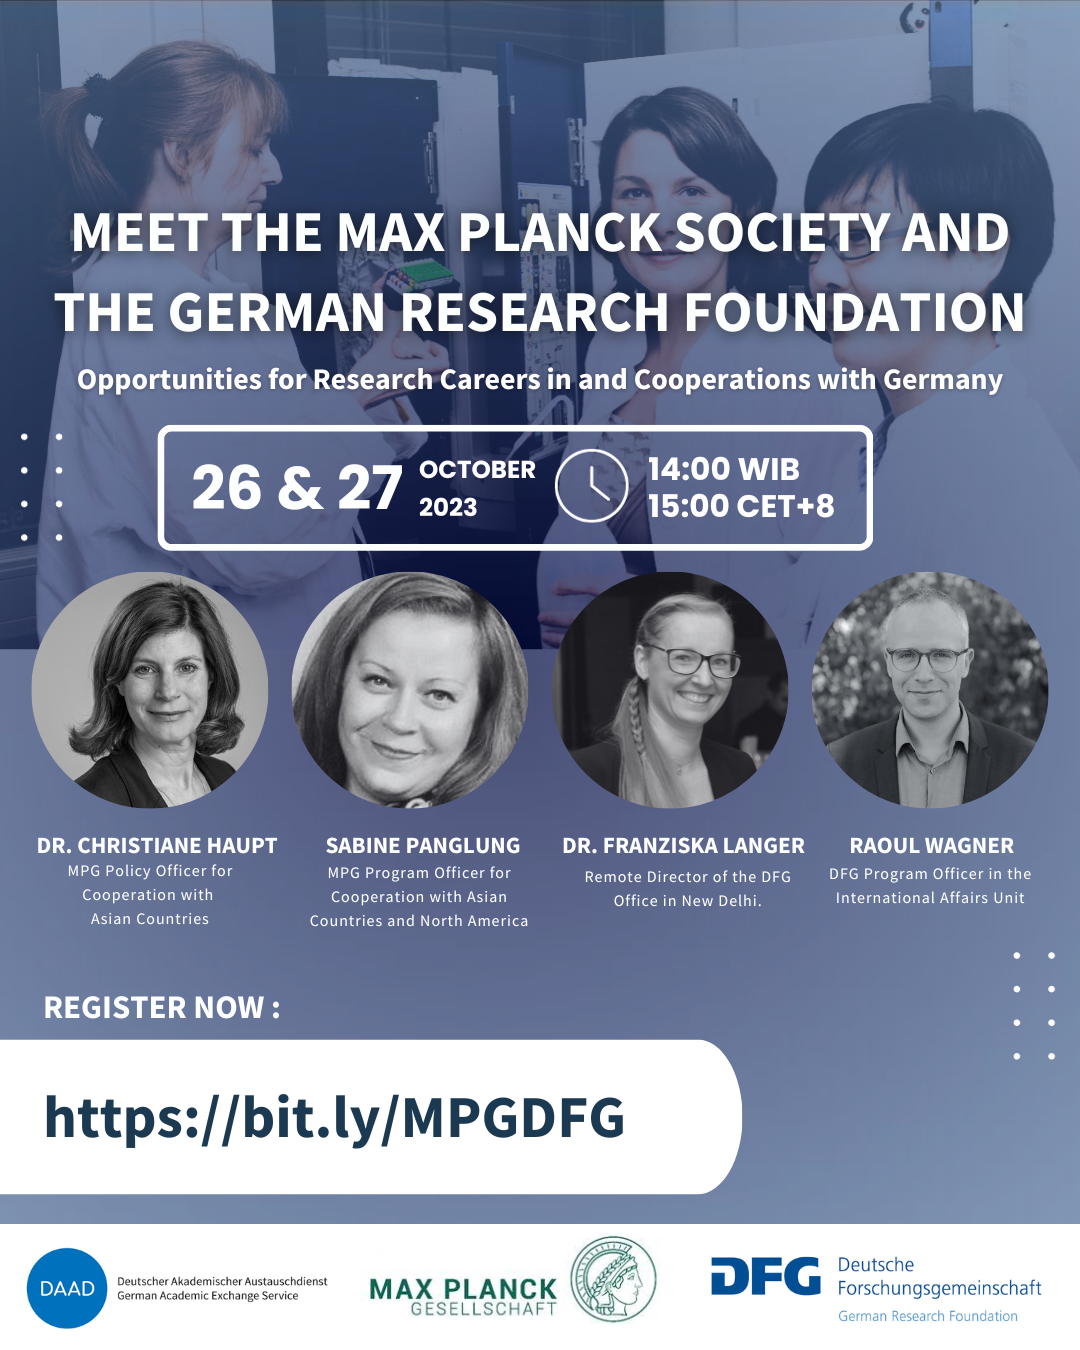 Meet the Max Planck Society (MPG) and the German Research Foundation (DFG)